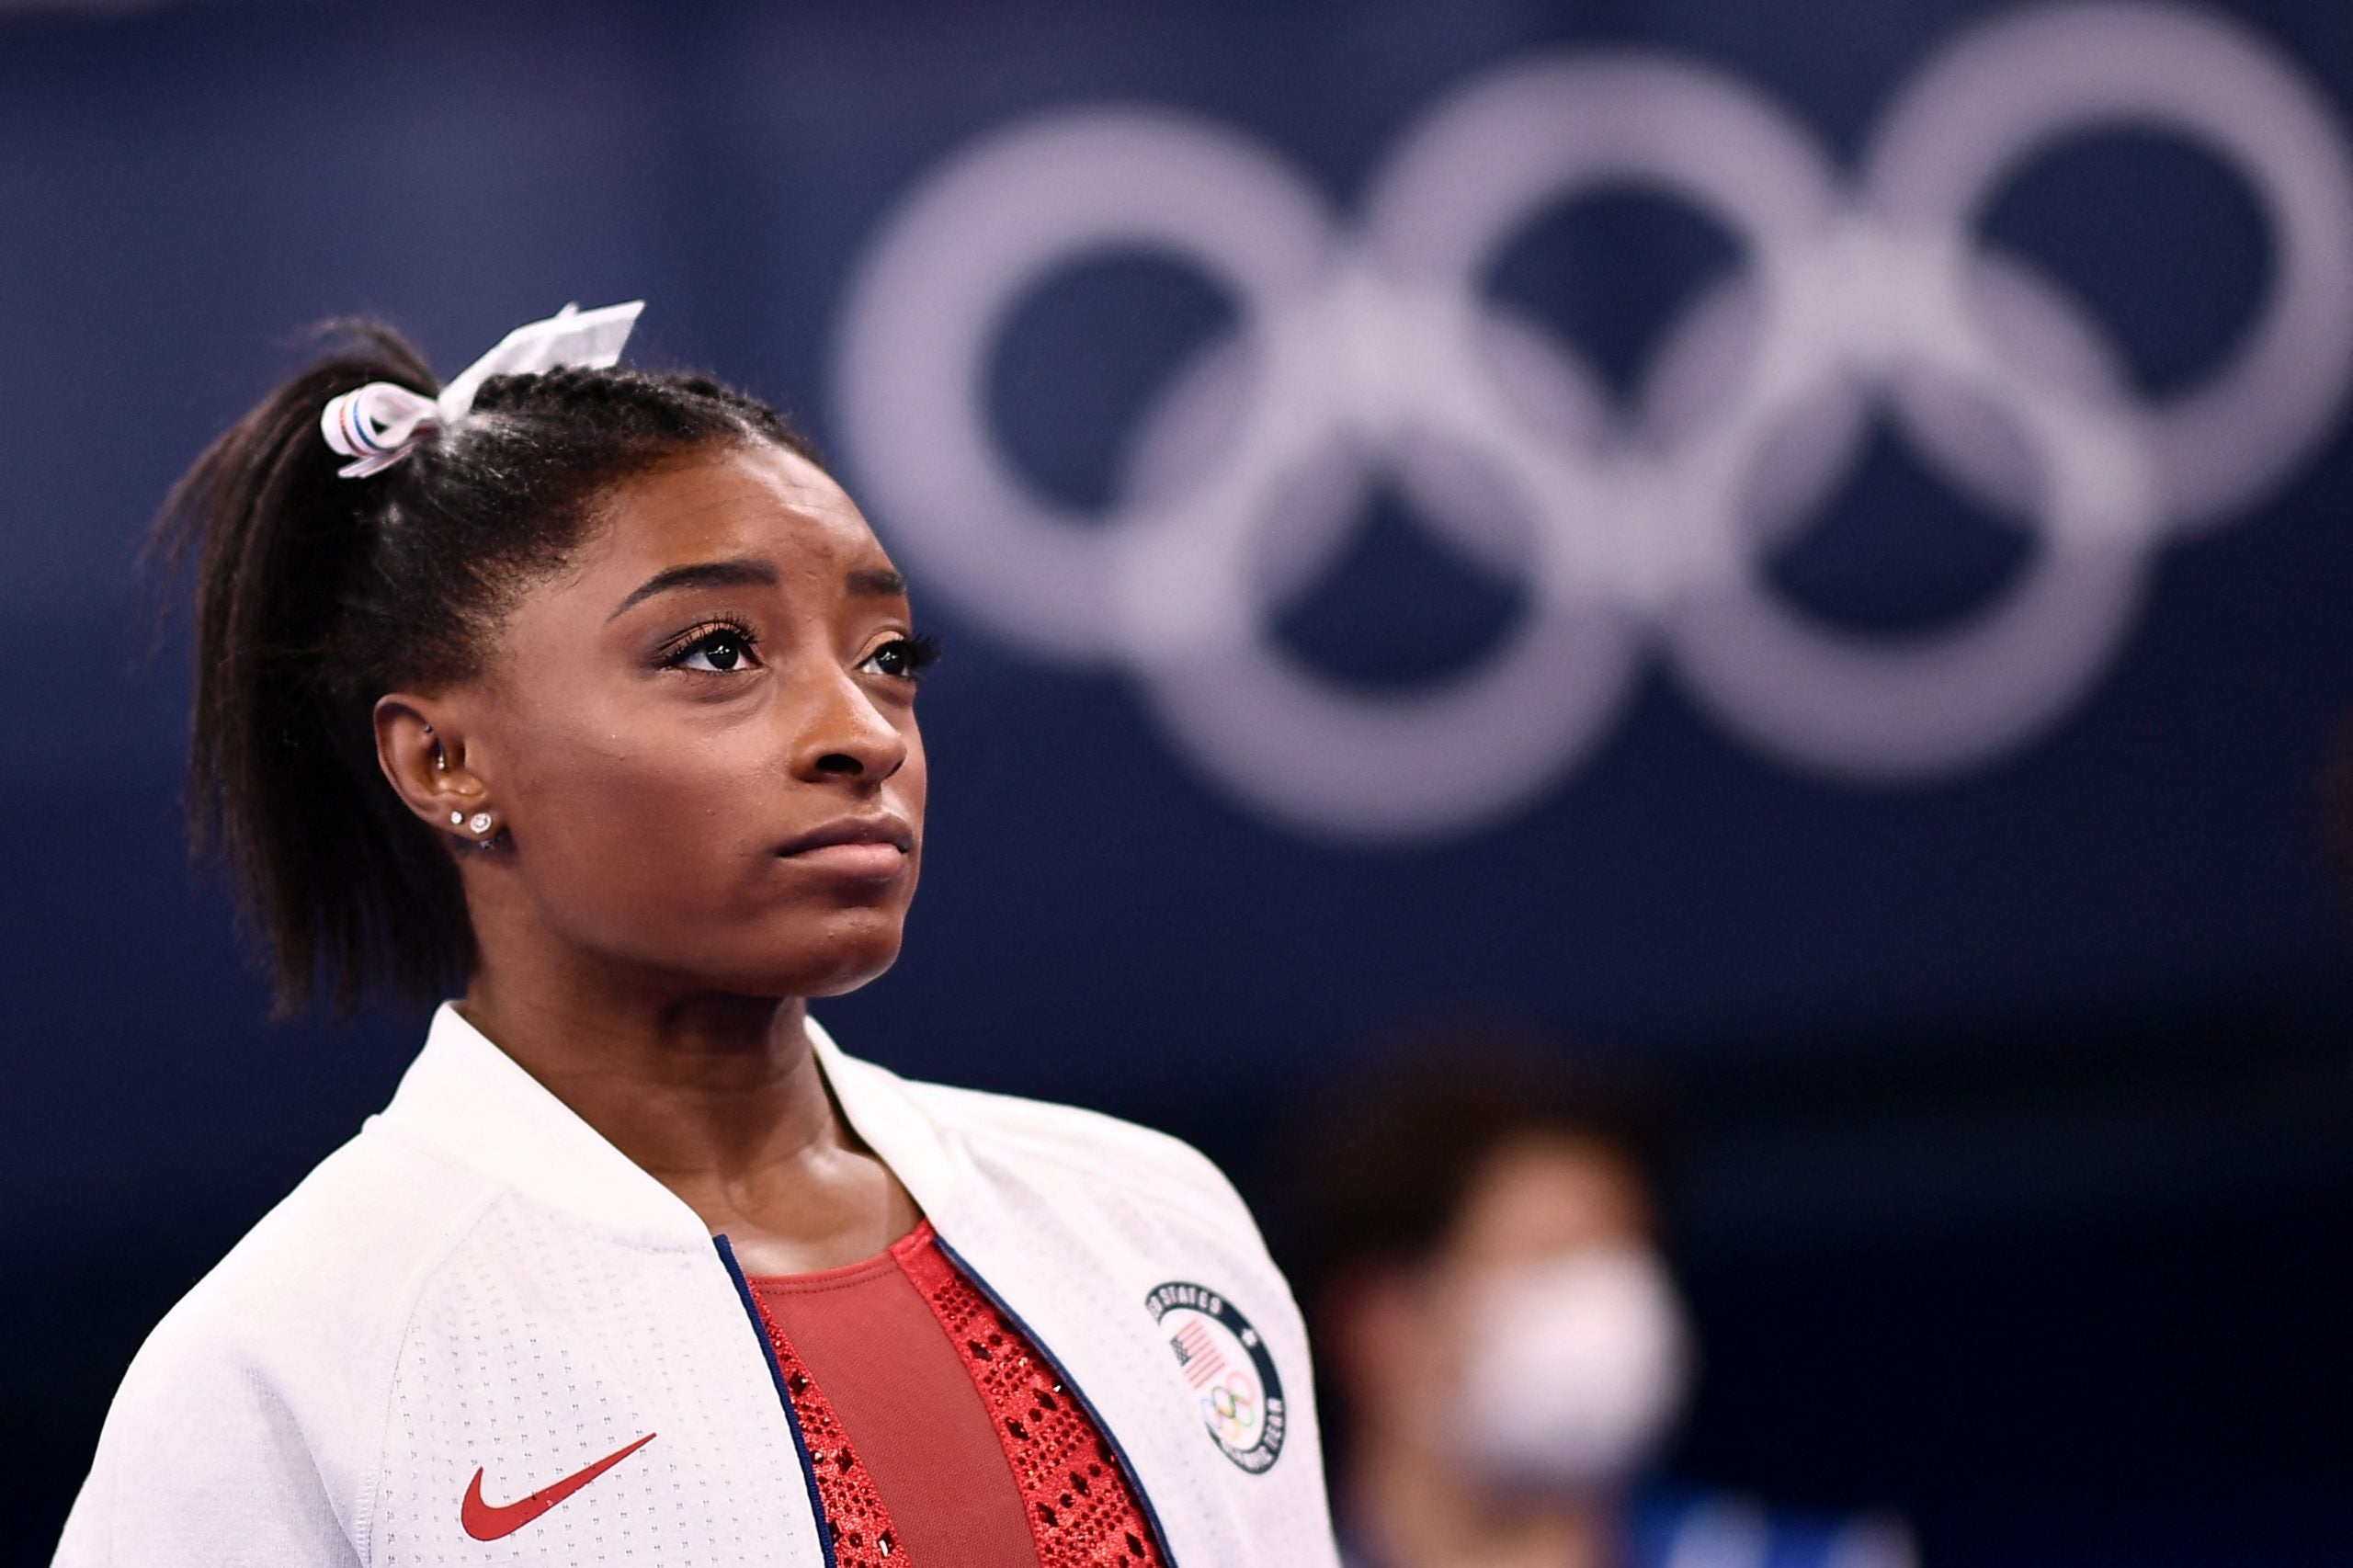 Simone Biles Withdraws From Women's Team Gymnastics Finals At Olympics